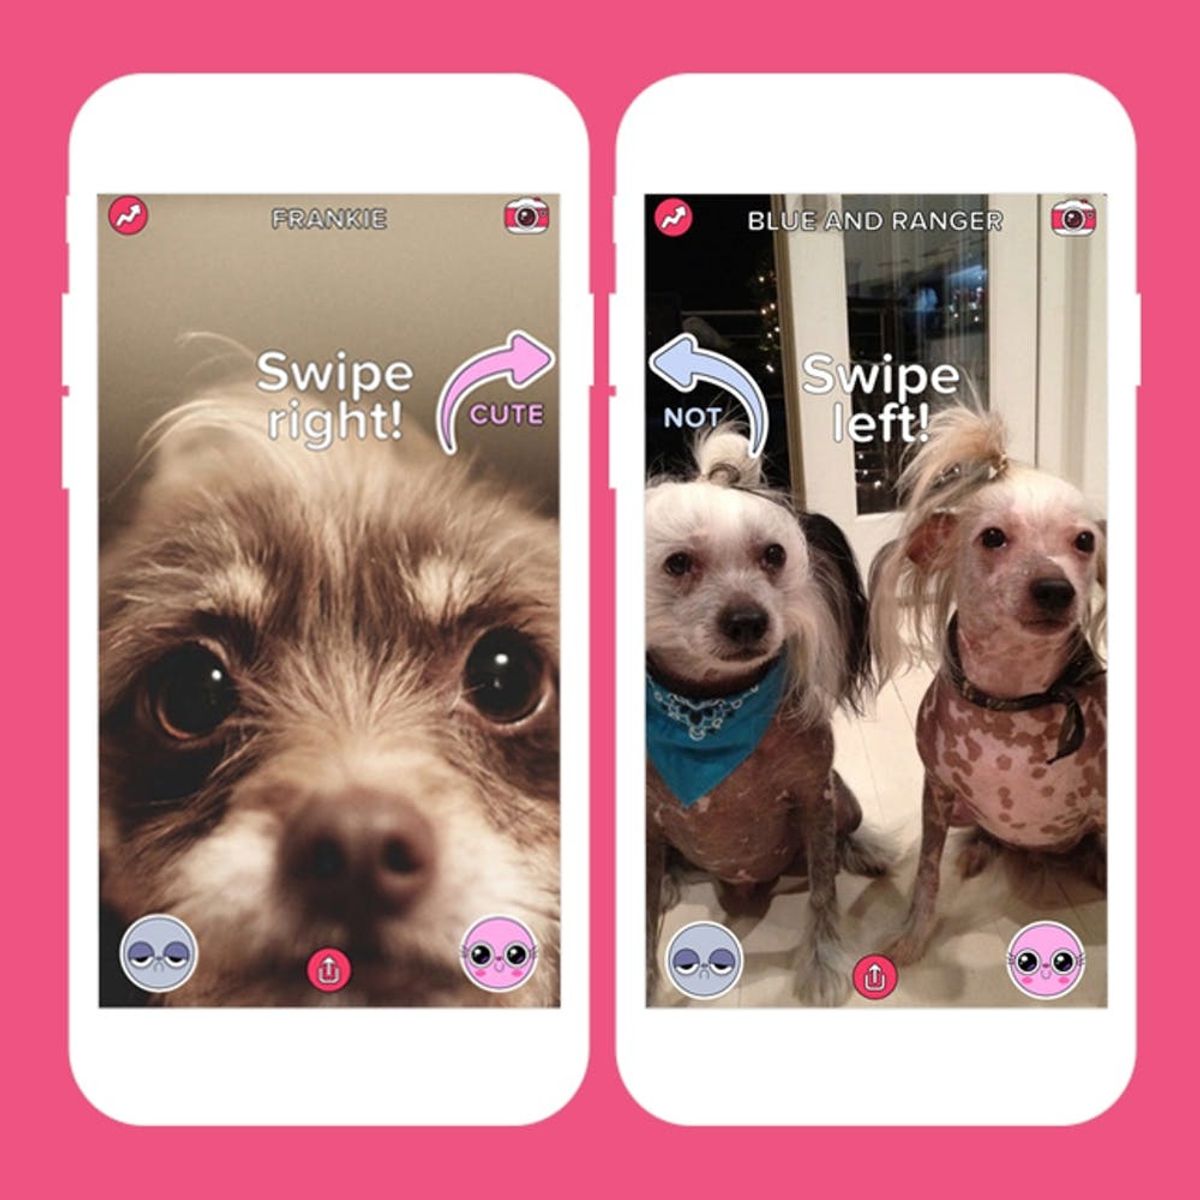 5 Best Apps of the Week: An App for Looking at Cute Pets All Day + More!